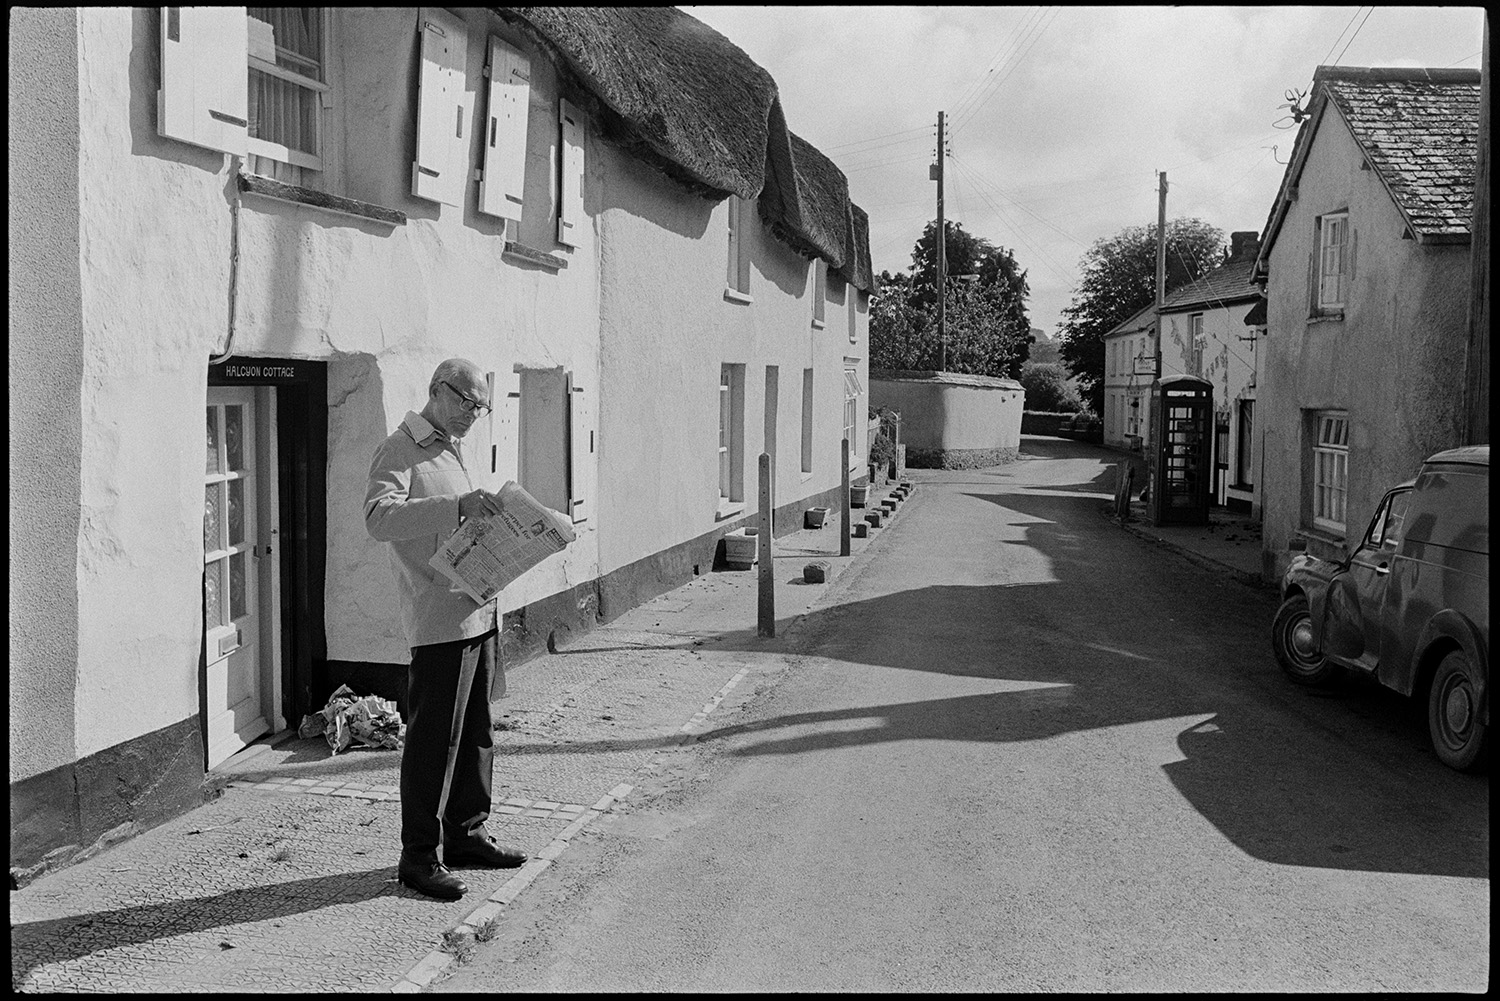 Street scene with man reading newspaper. 
[A man reading a newspaper outside a thatched cottage with window shutters in Fore Street, Dolton. A van is parked in the road opposite him and a telephone box can be seen further down the street.]